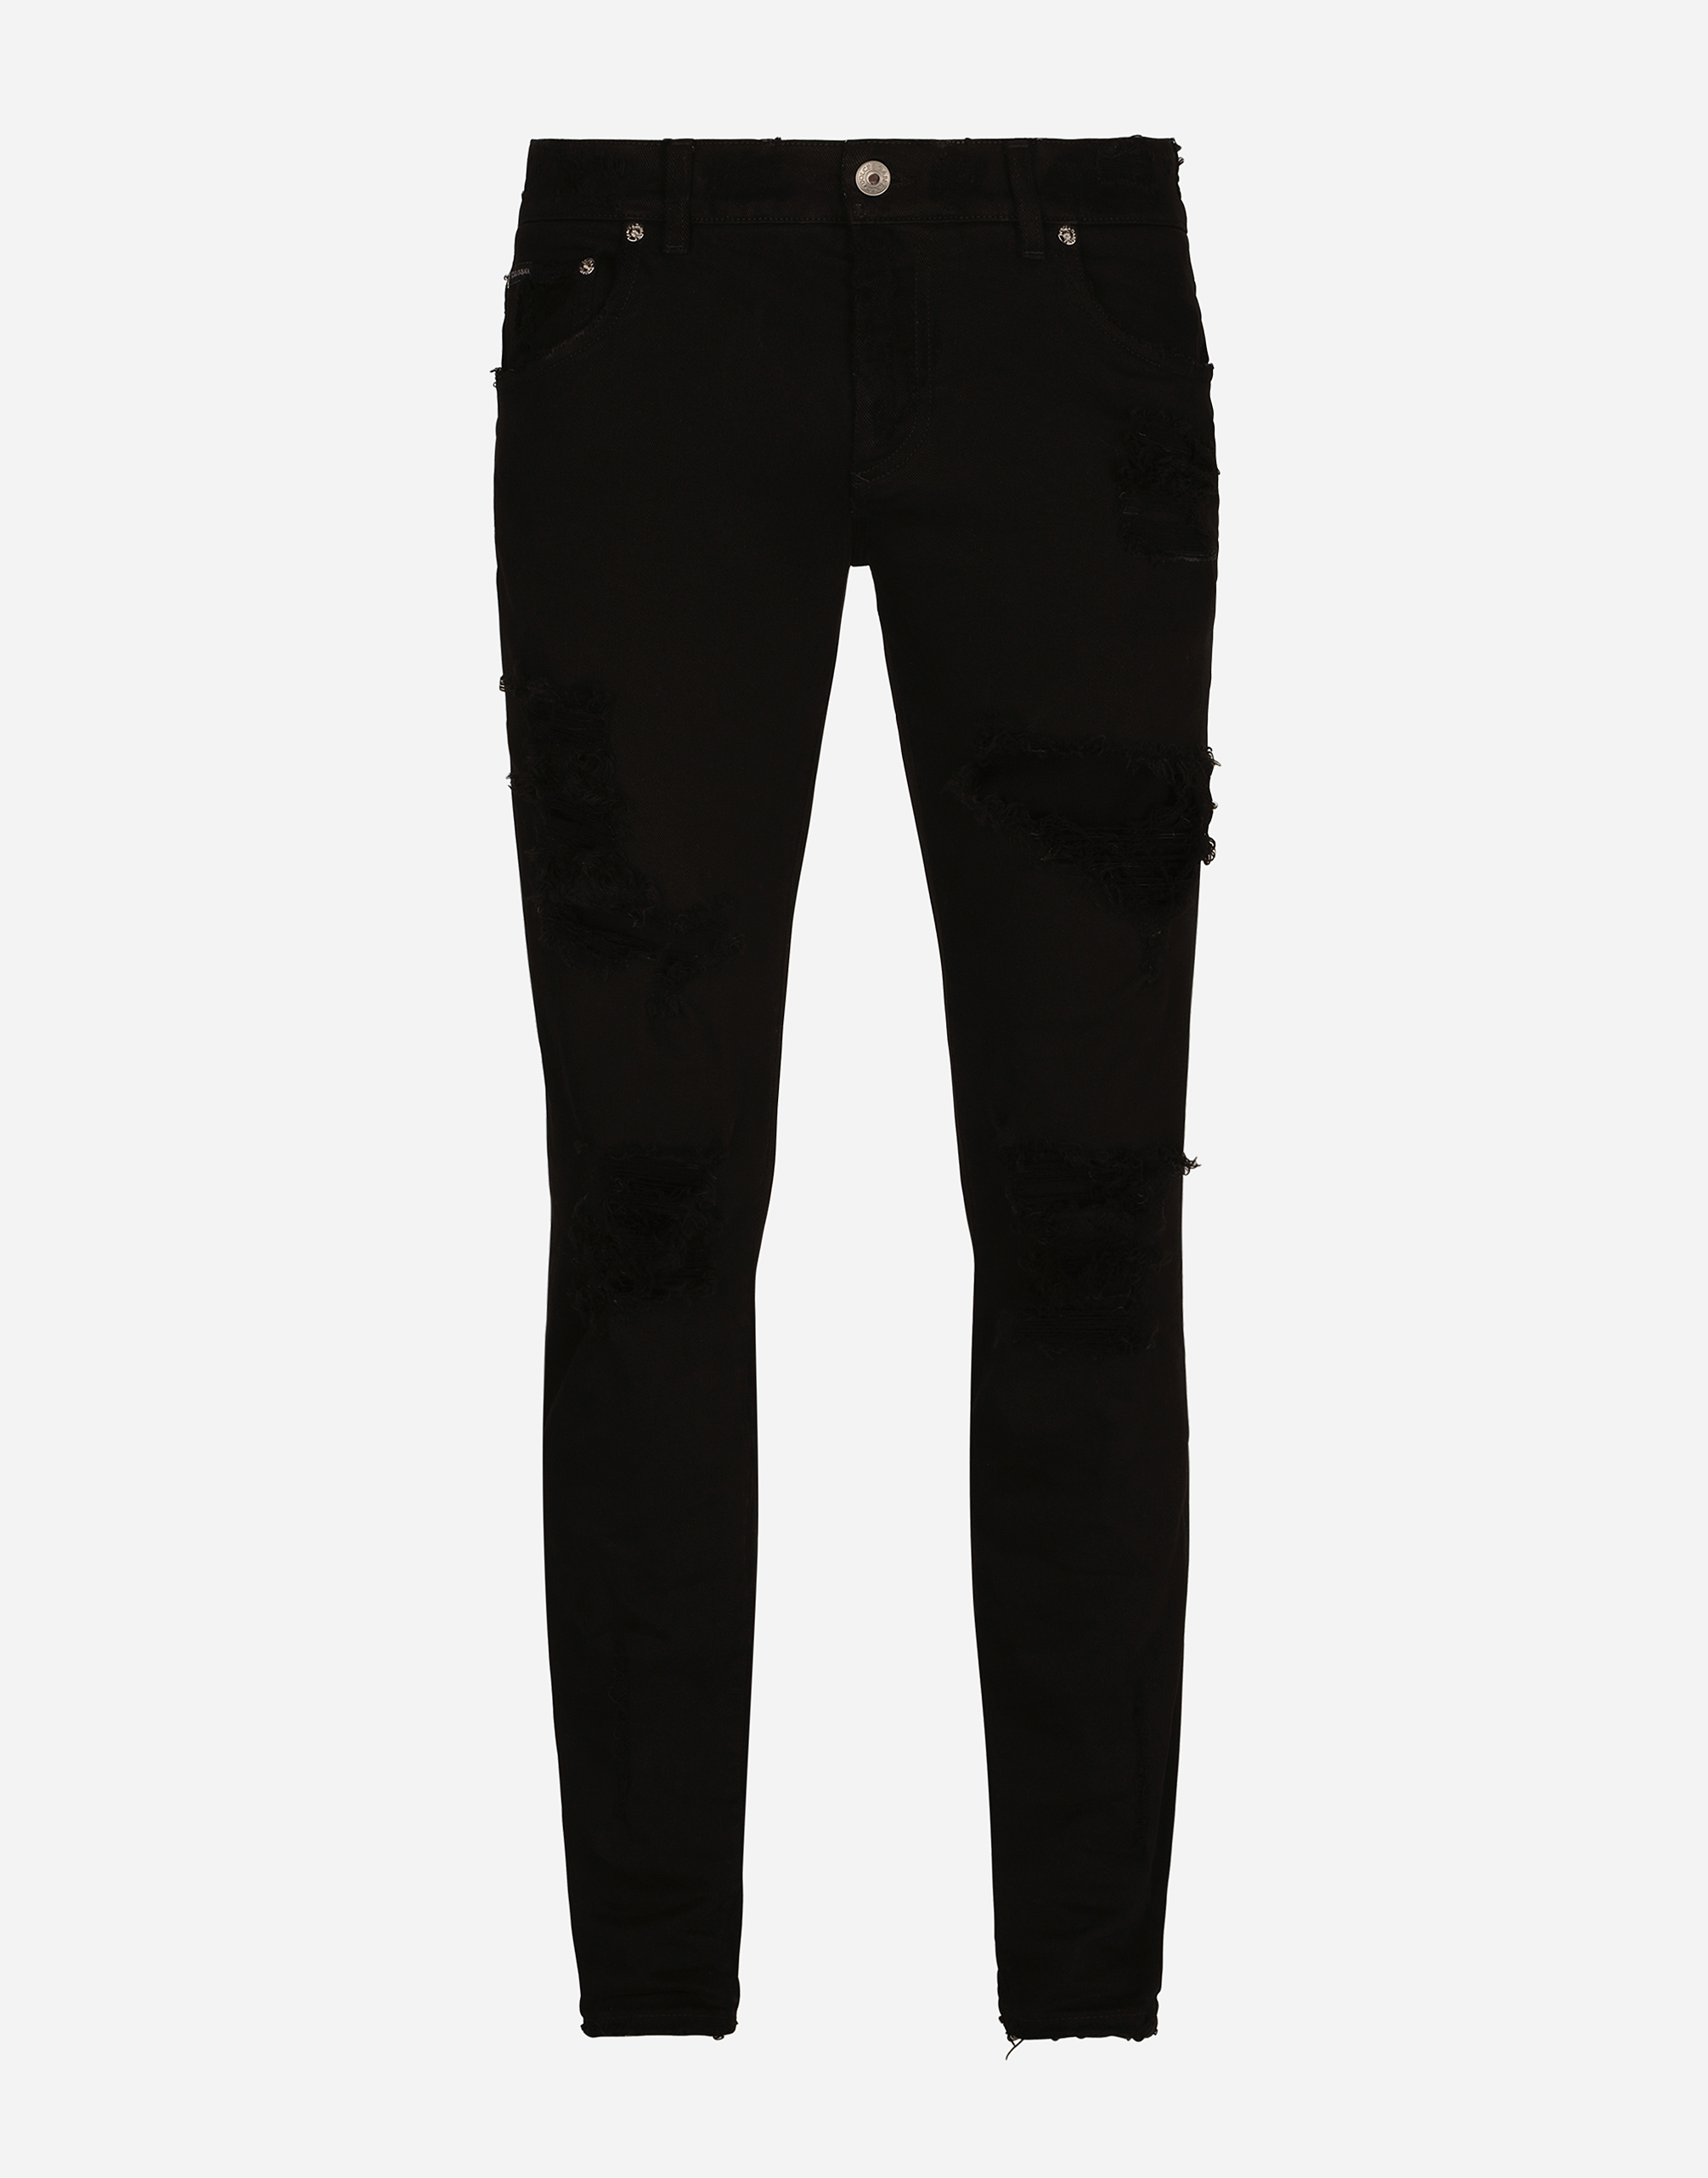 Black skinny stretch jeans with rips in Multicolor